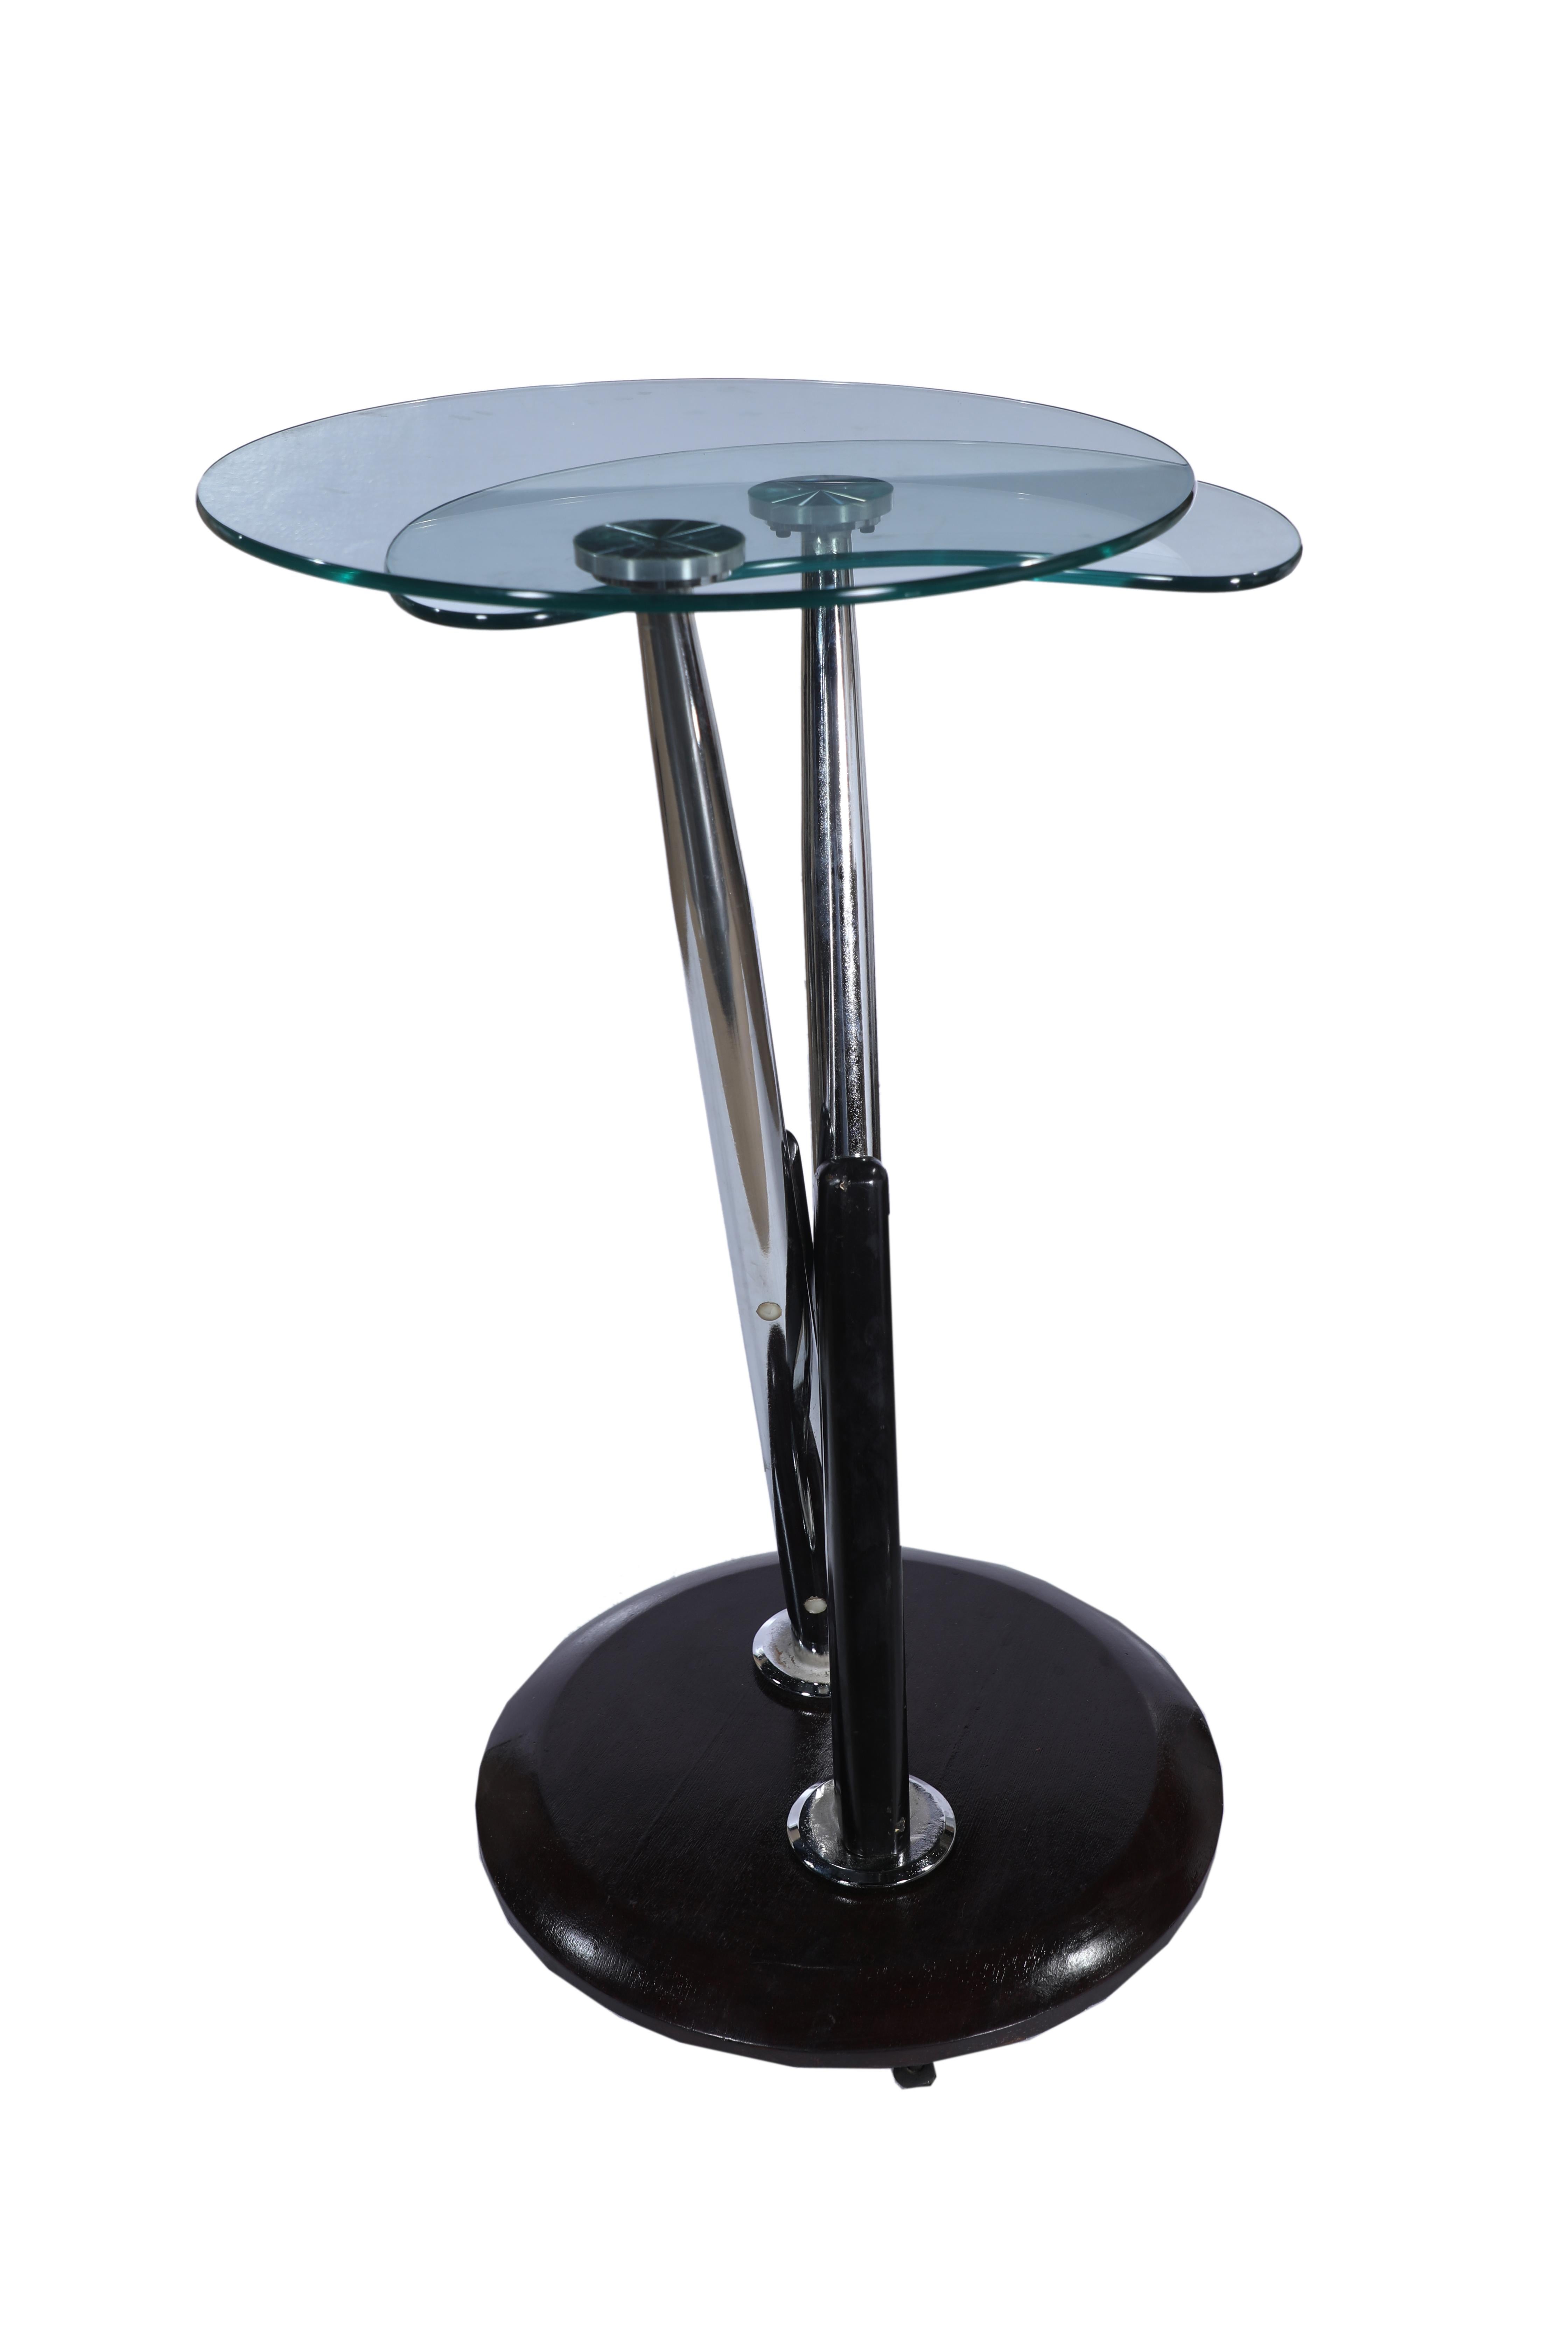 European Chrome, Wood and Glass Swivel and Expanding High Top Table with Four Bar Stools For Sale